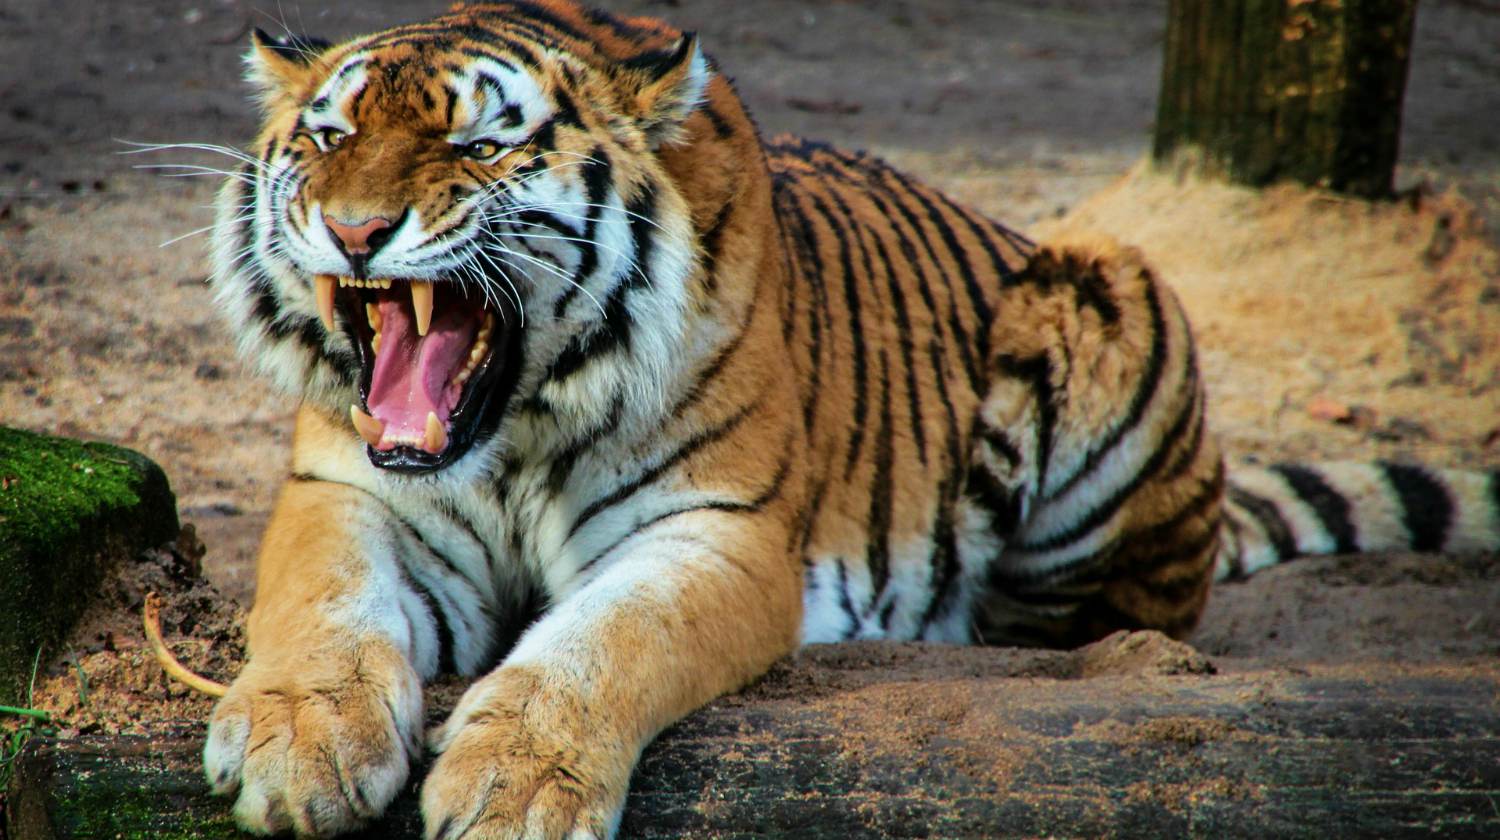 A tiger in nature | How To Survive Animal Attacks | Featured